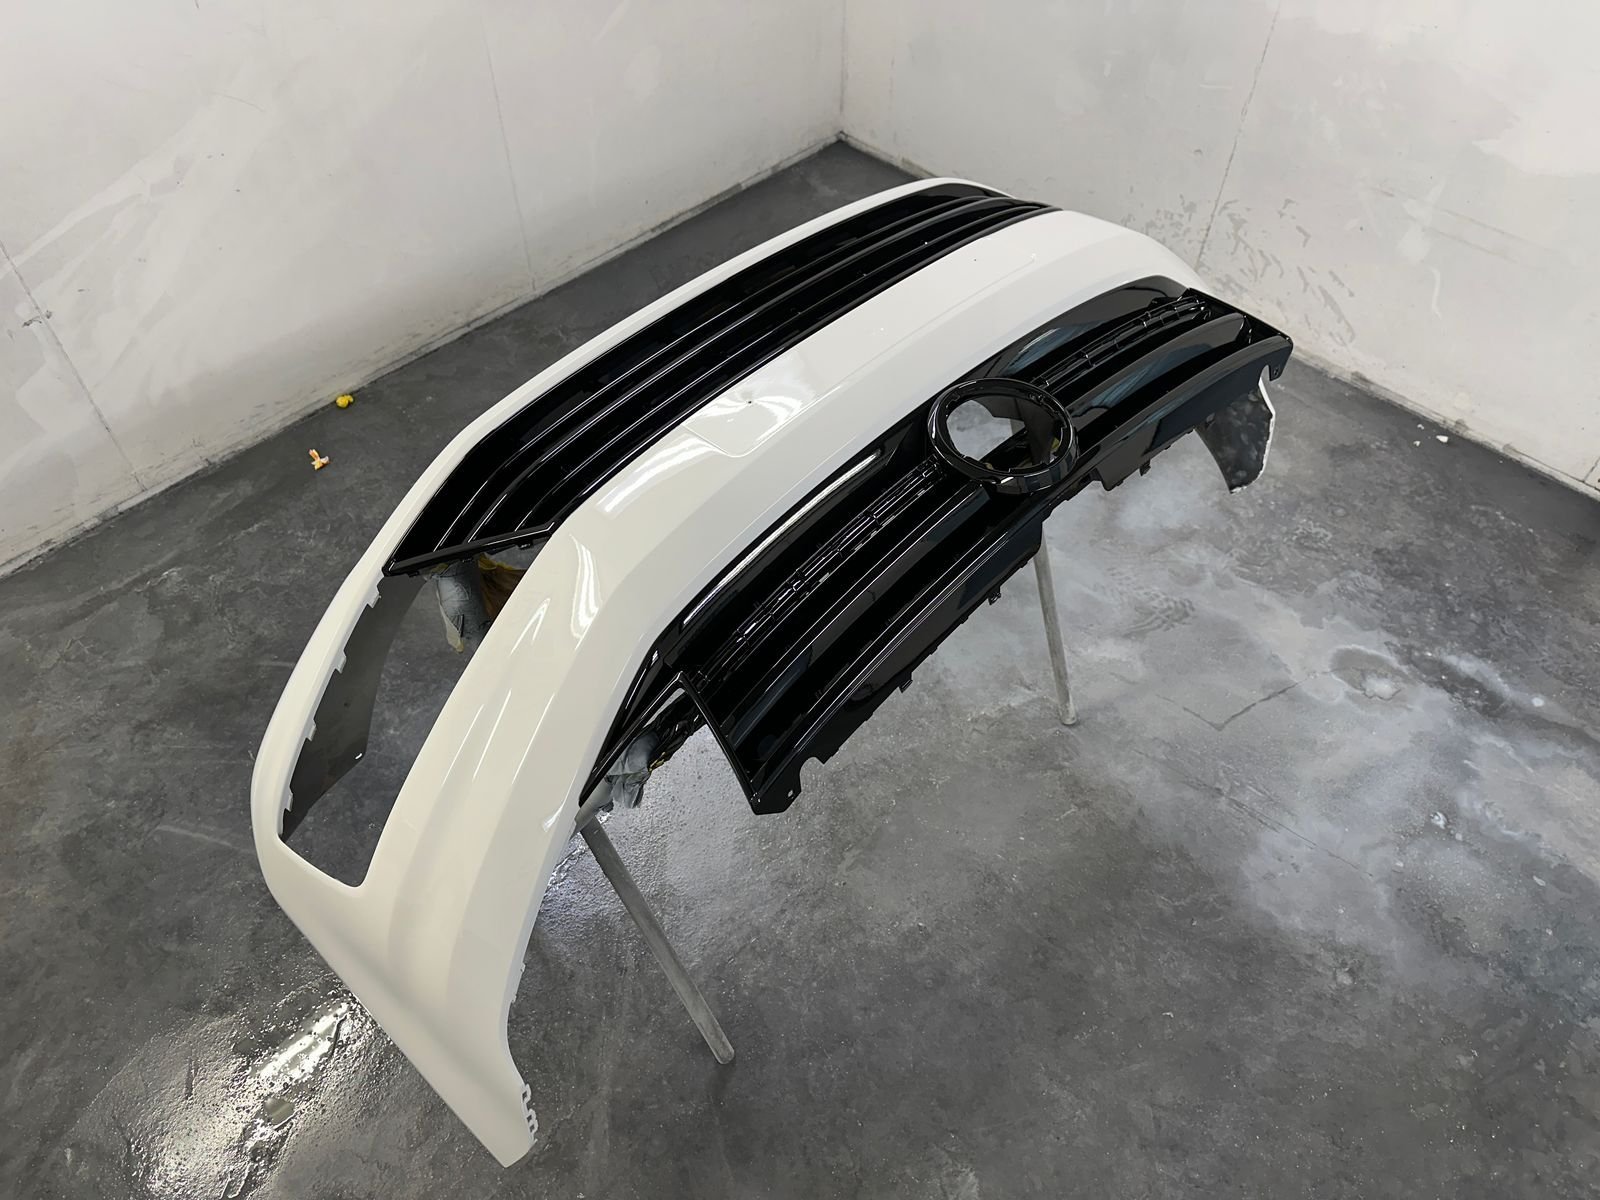 VW Caddy Paint Booth - Our Process